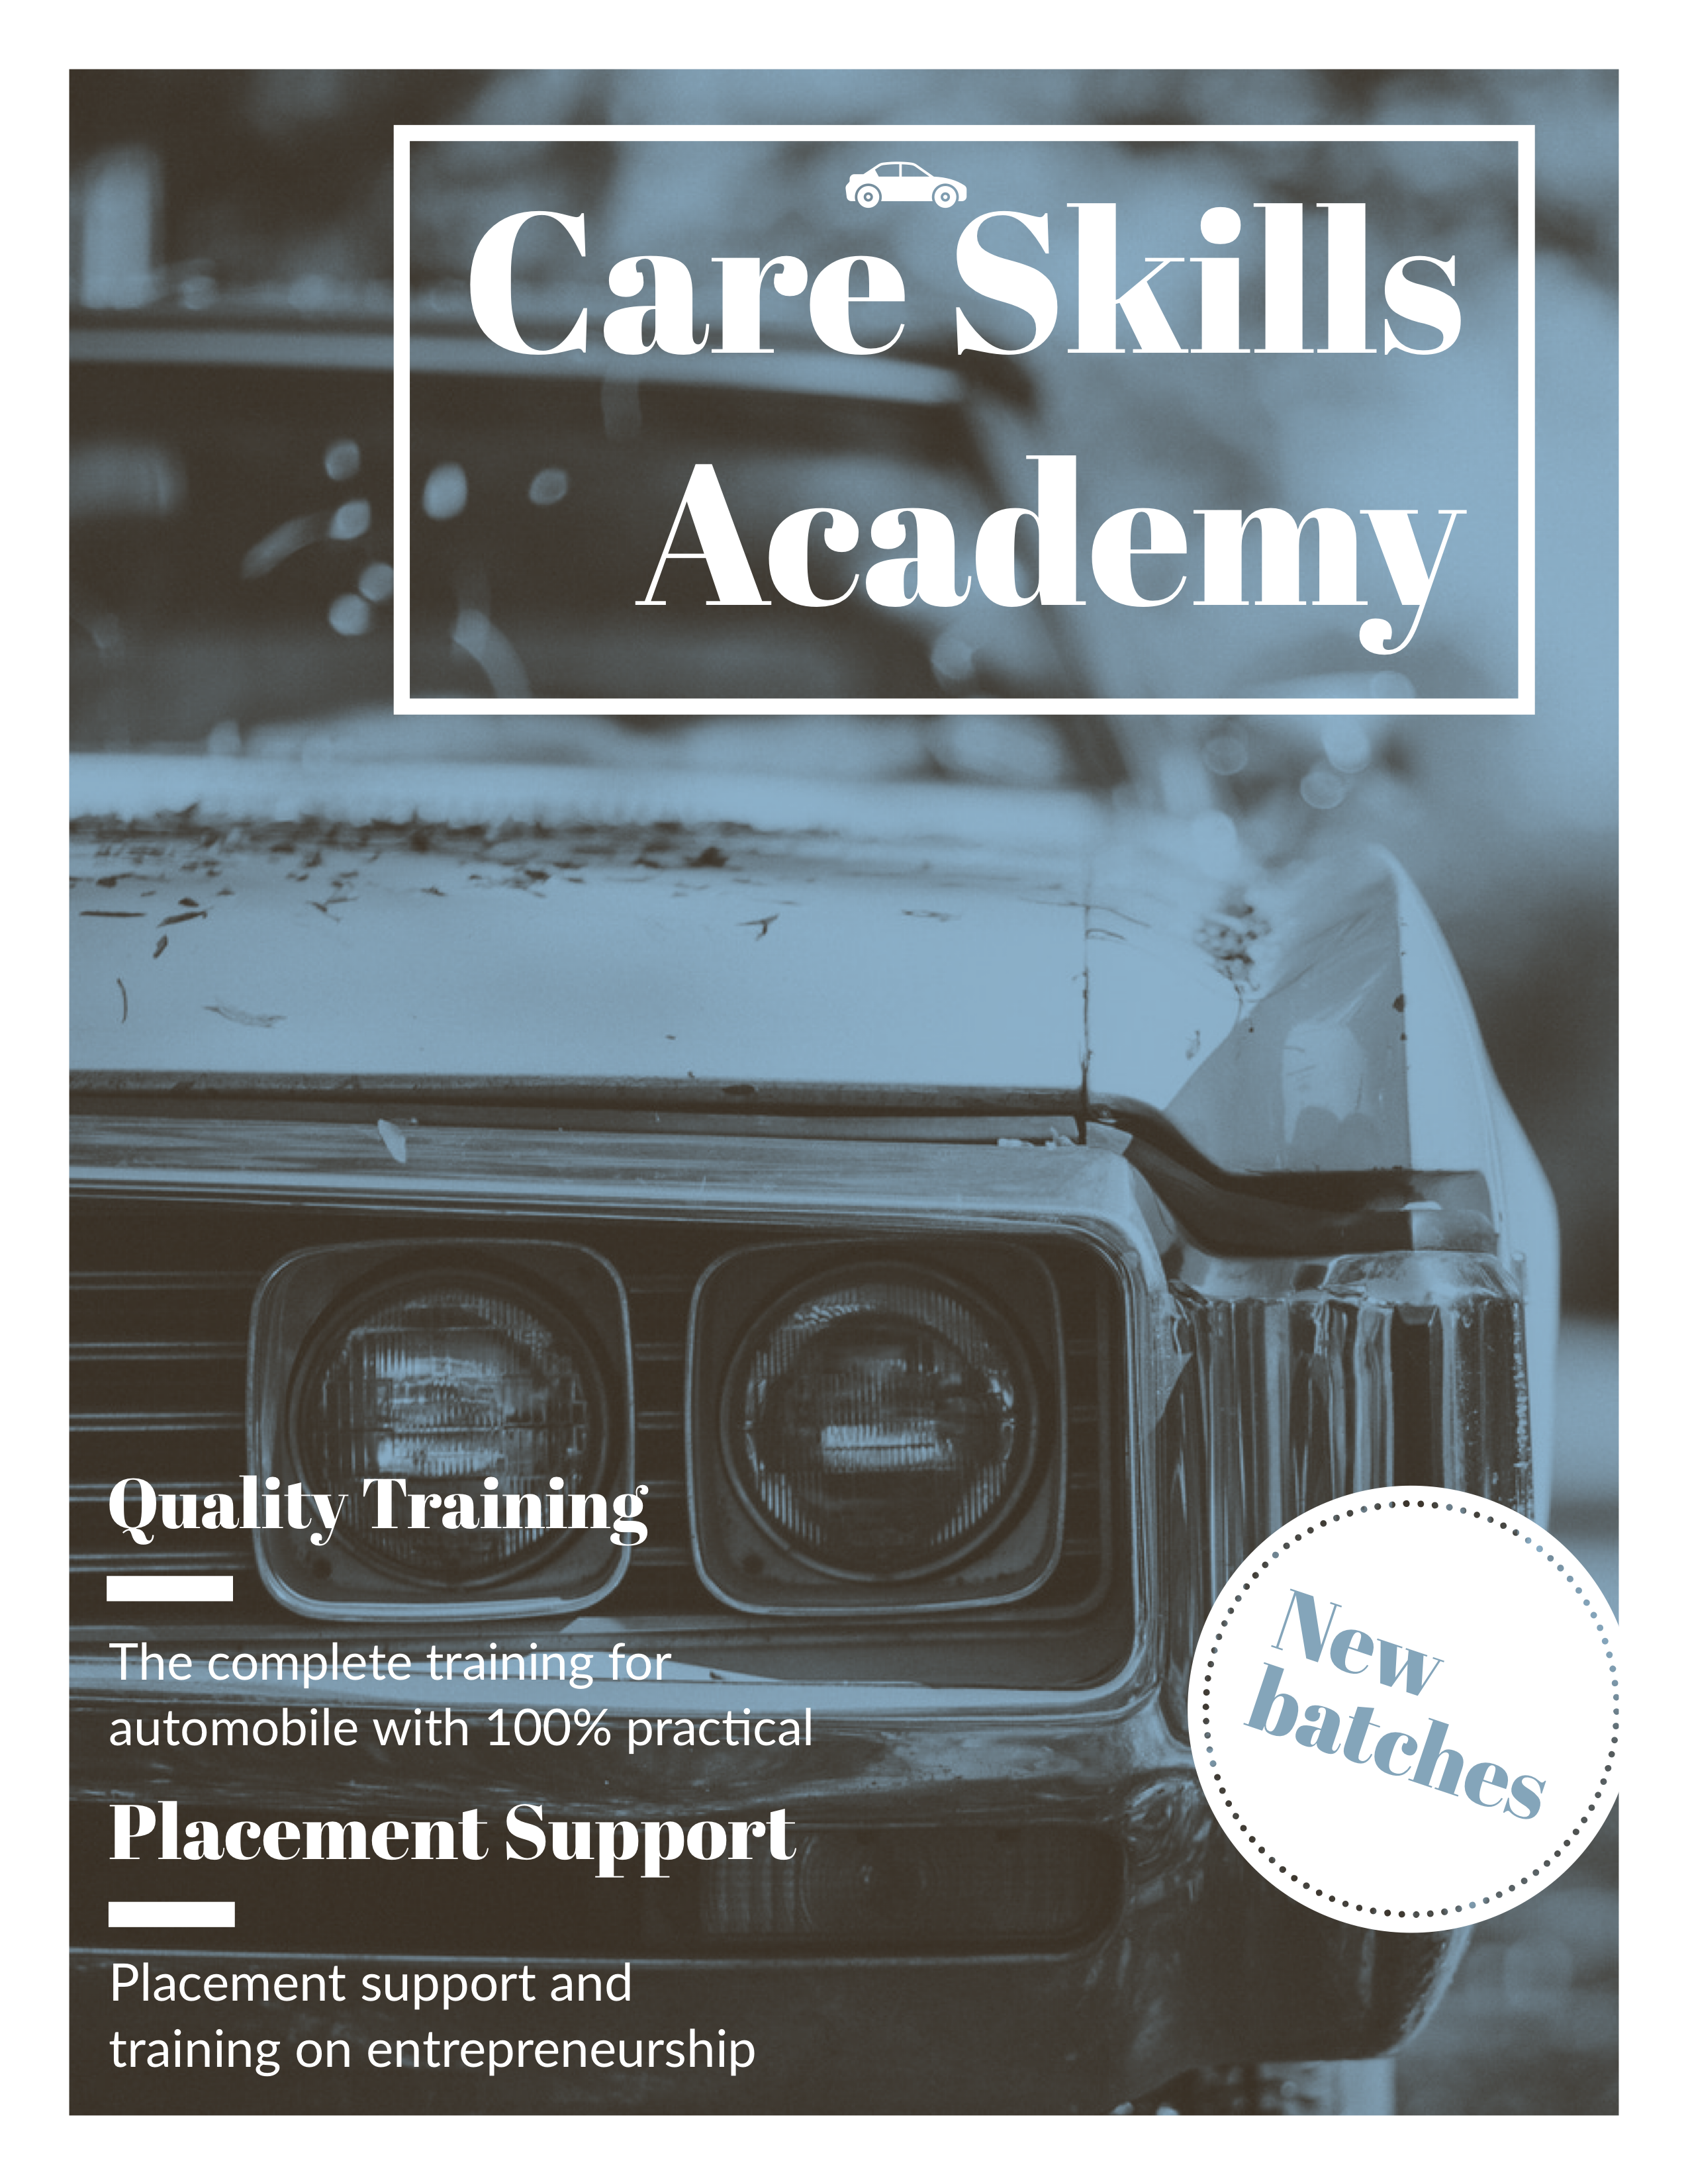 ￼5 Reasons Why You Should Consider an Automobile Repair Course from Care Skills Academy